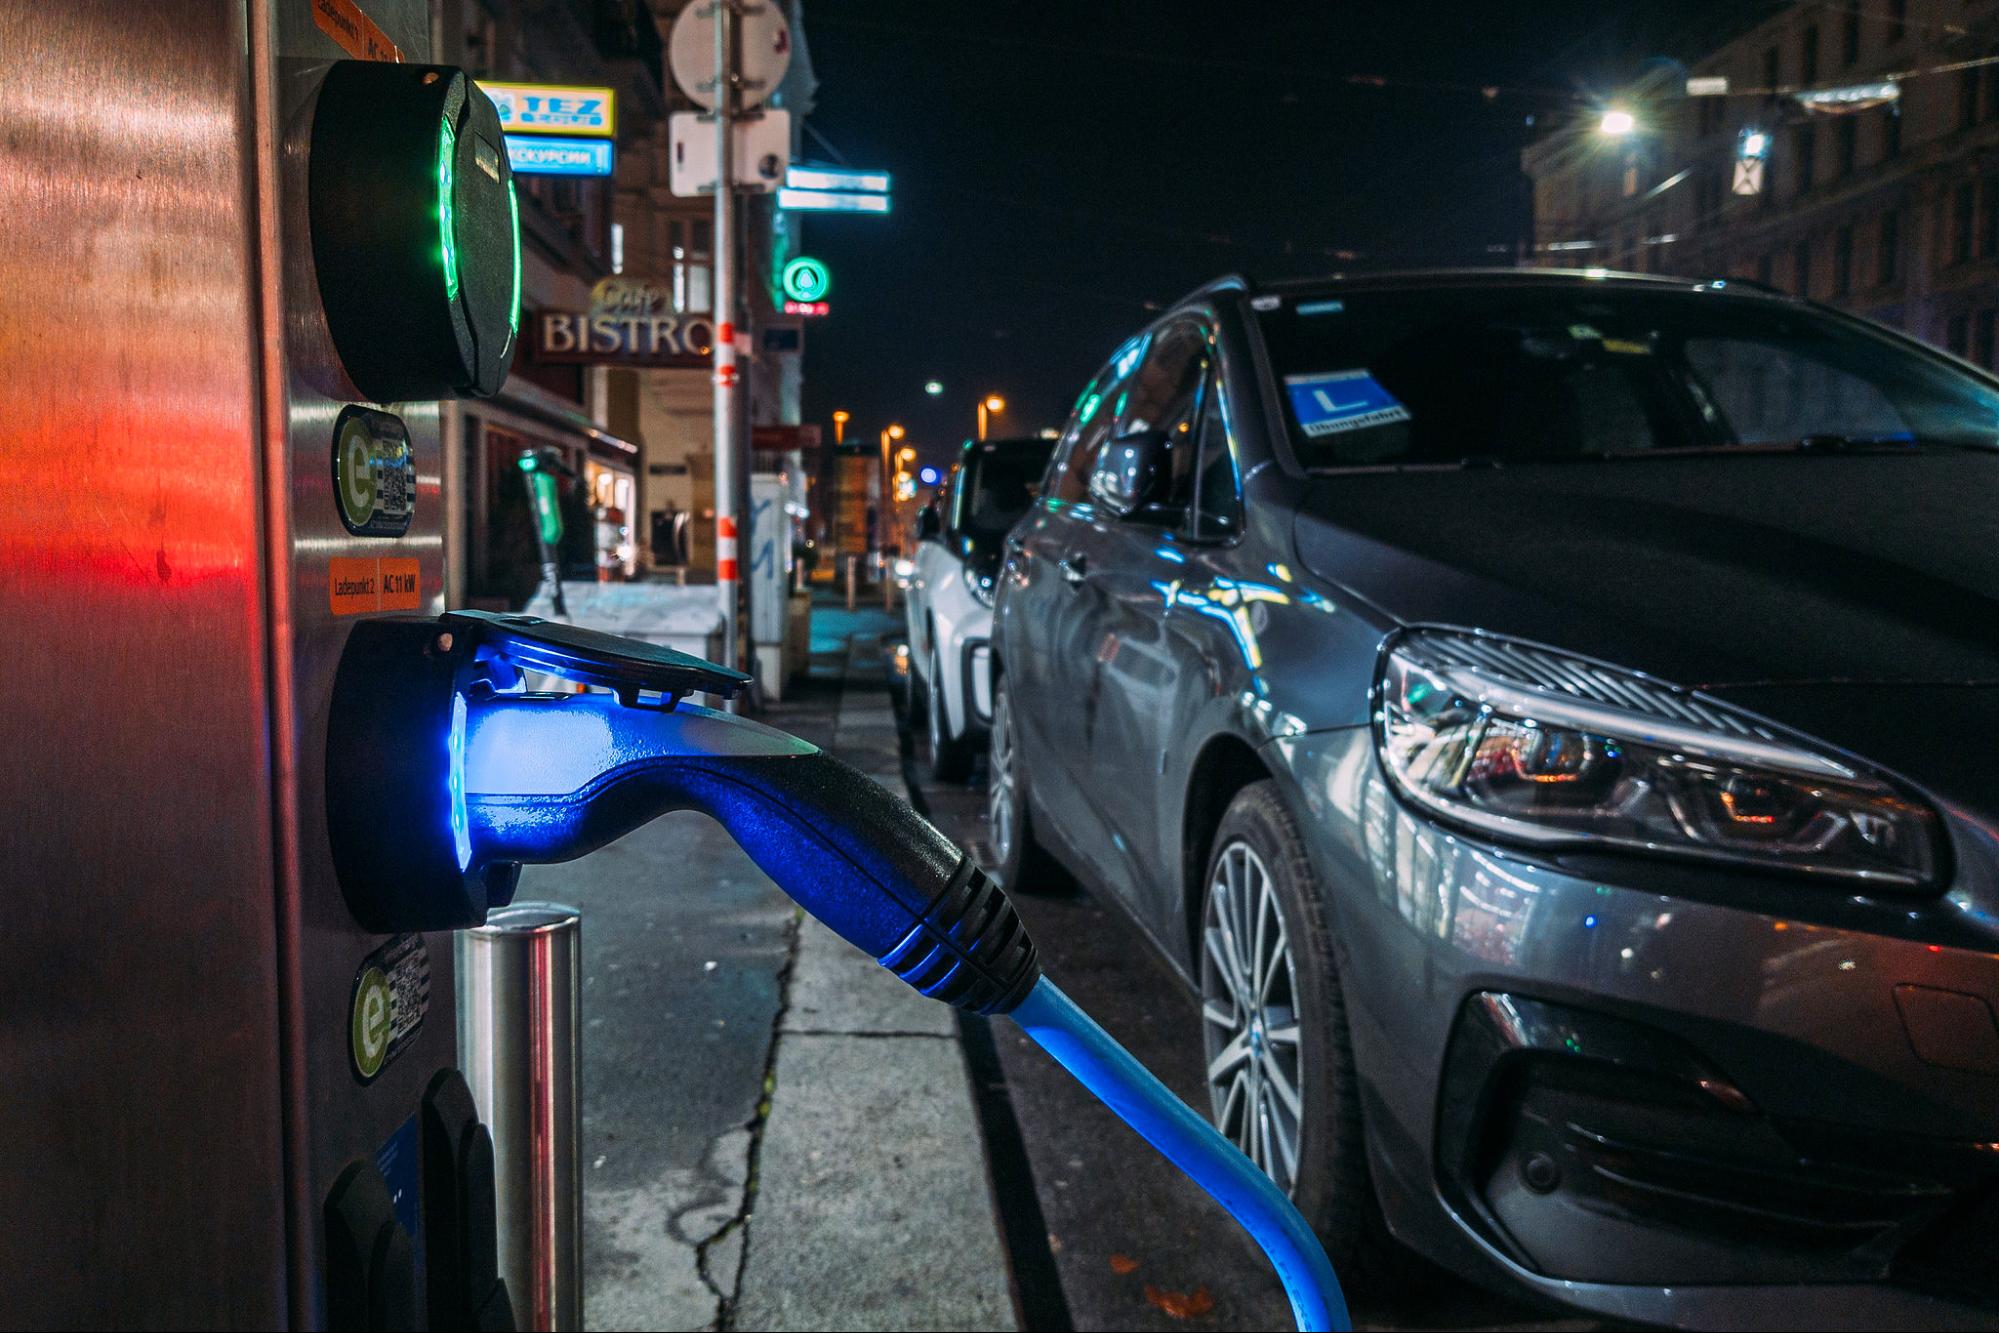 Power Companies Band Together to Build Coast-to-Coast EV Fast-Charger Network